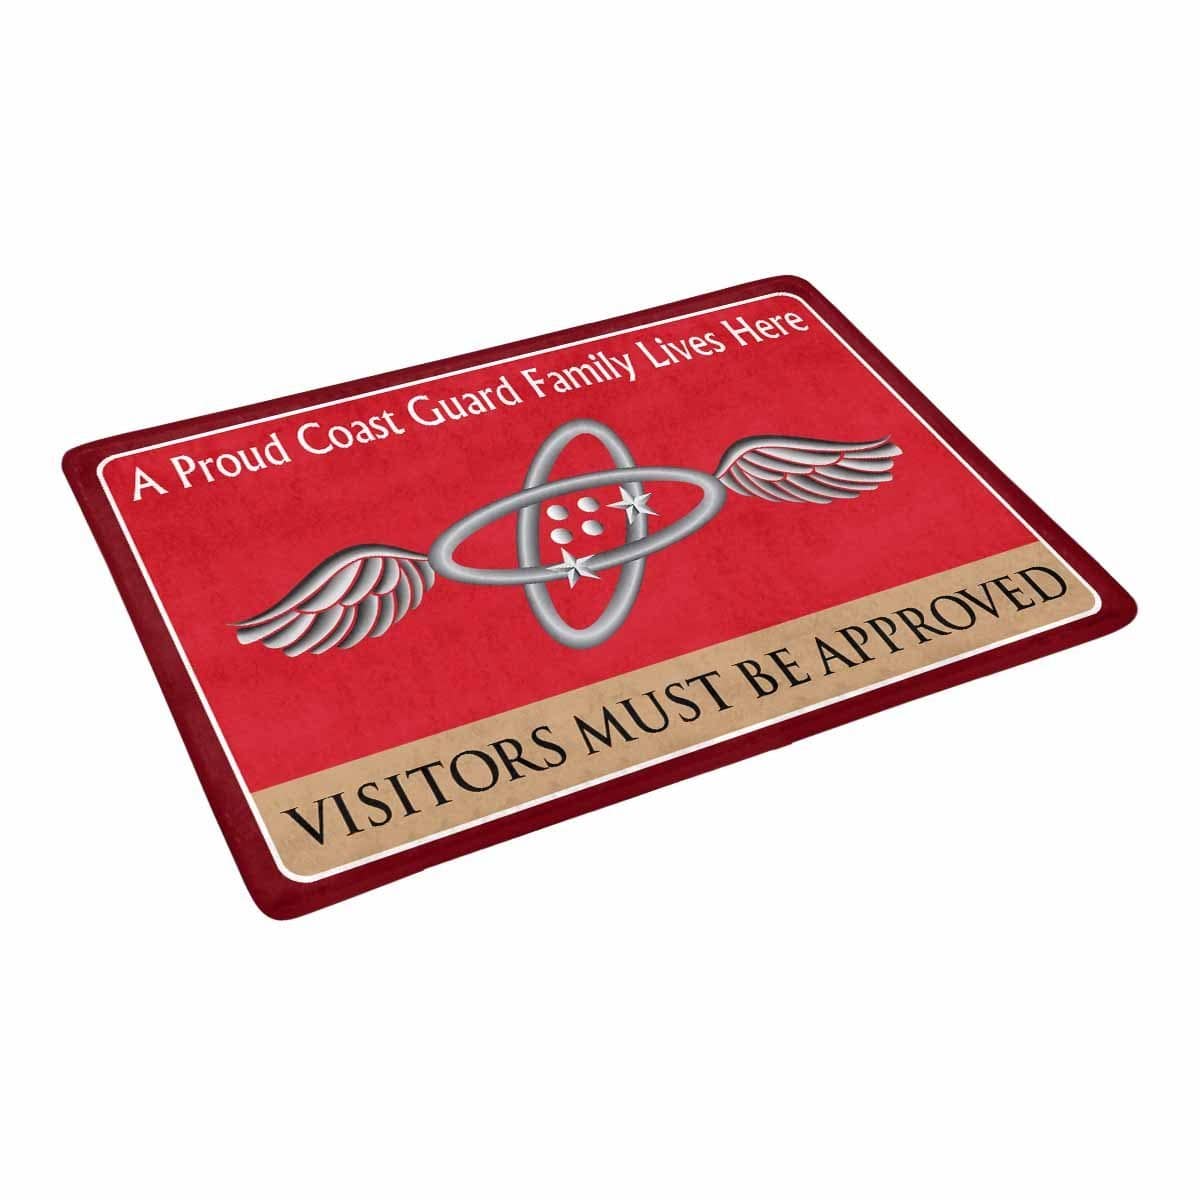 USCG AVIONICS ELECTRICAL TECHNICIAN AET Logo Family Doormat - Visitors must be approved (23.6 inches x 15.7 inches)-Doormat-USCG-Rate-Veterans Nation